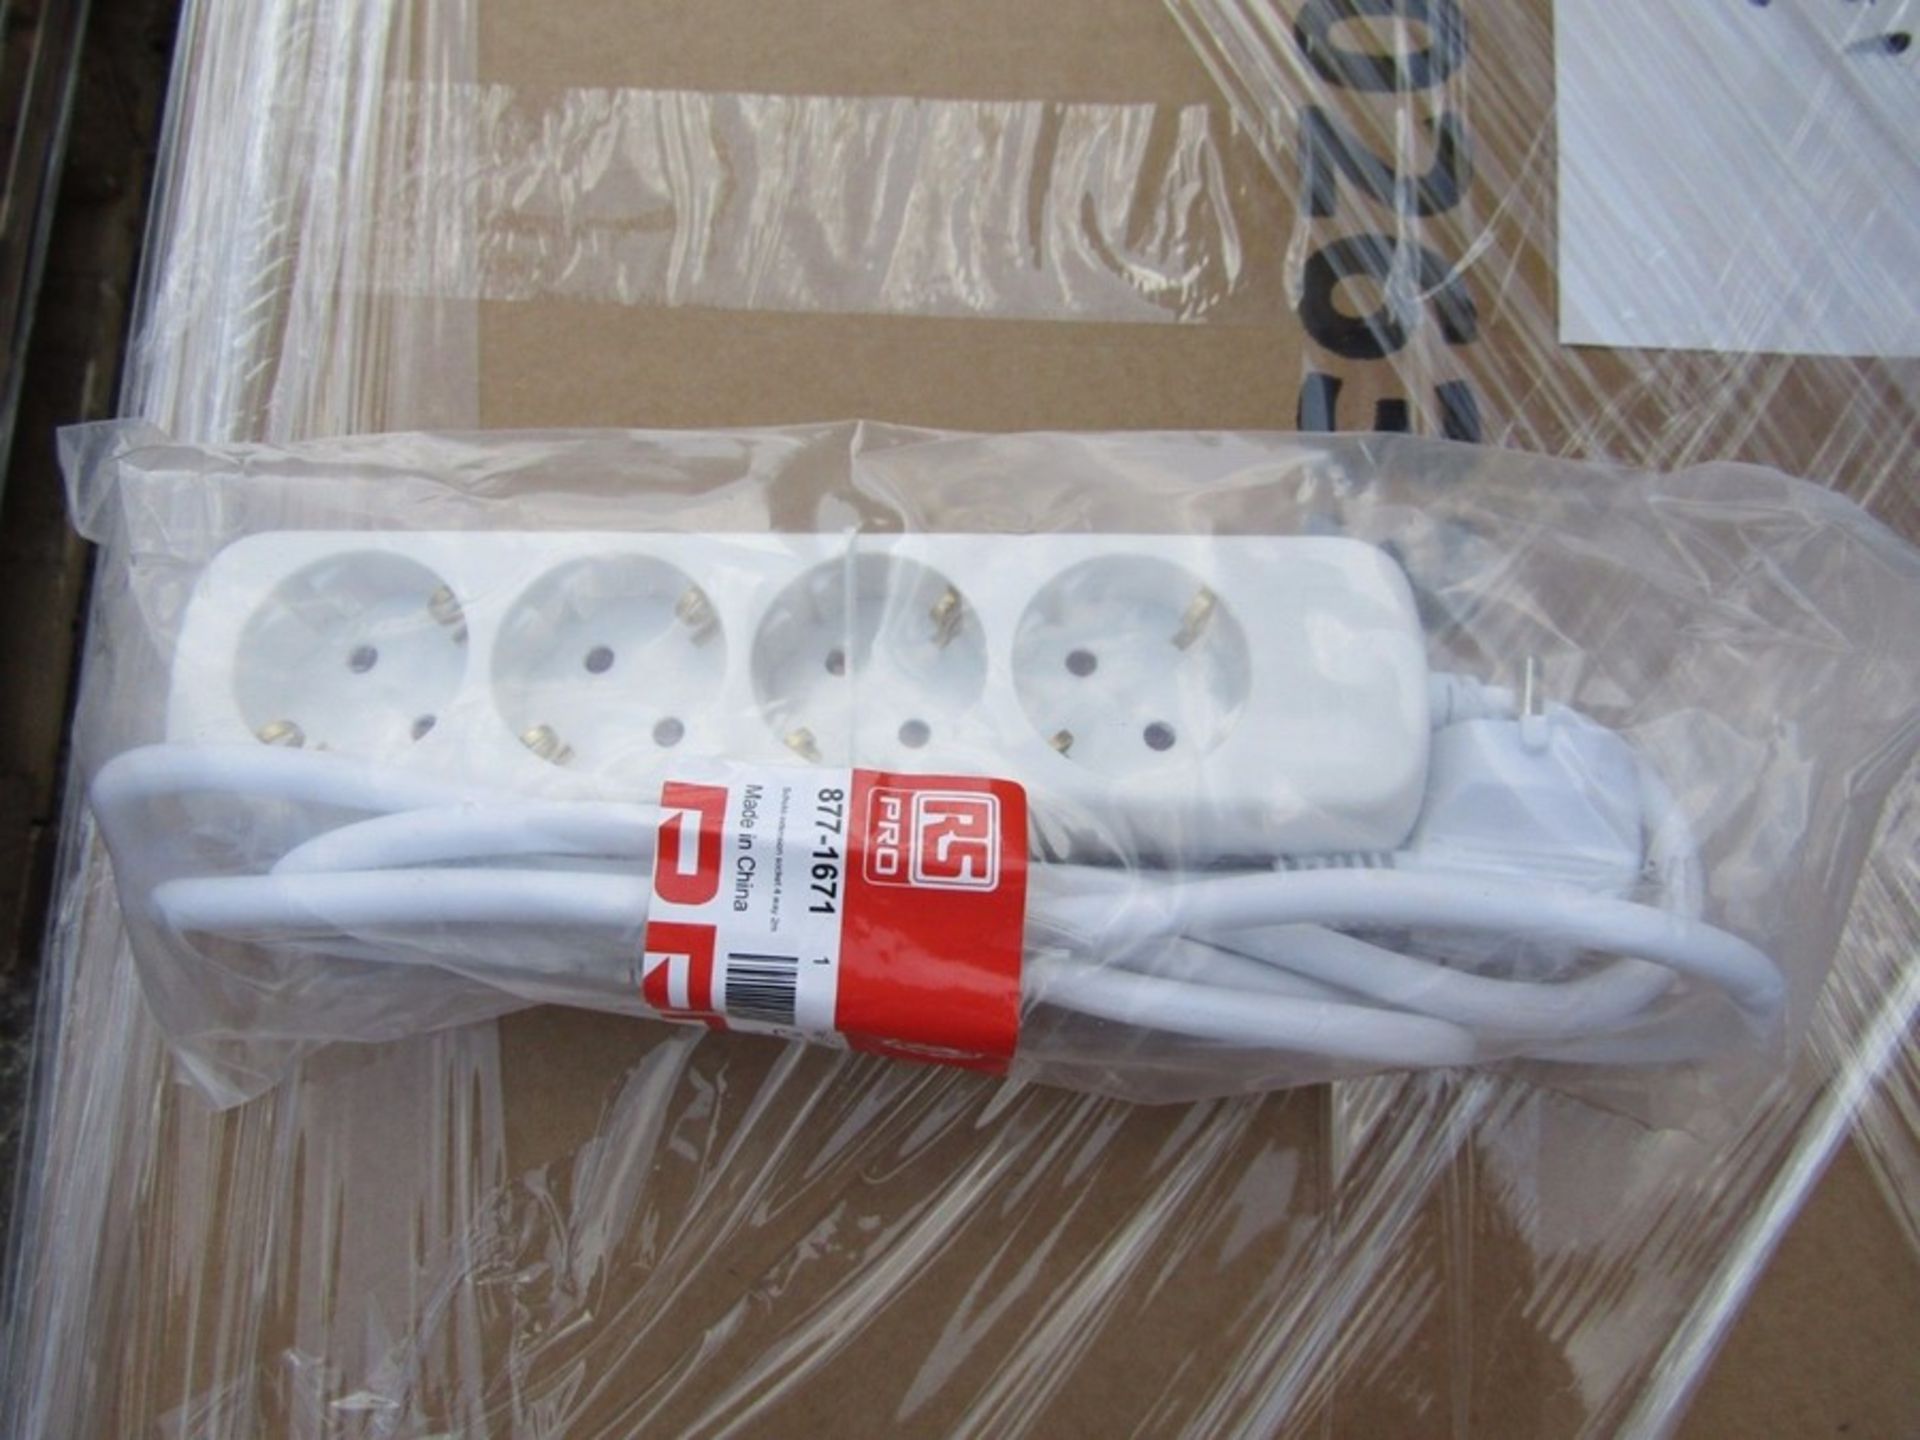 40 x Type F German 4 Way Switched Extension Sockets with CEE7/7 Plug - 8771671